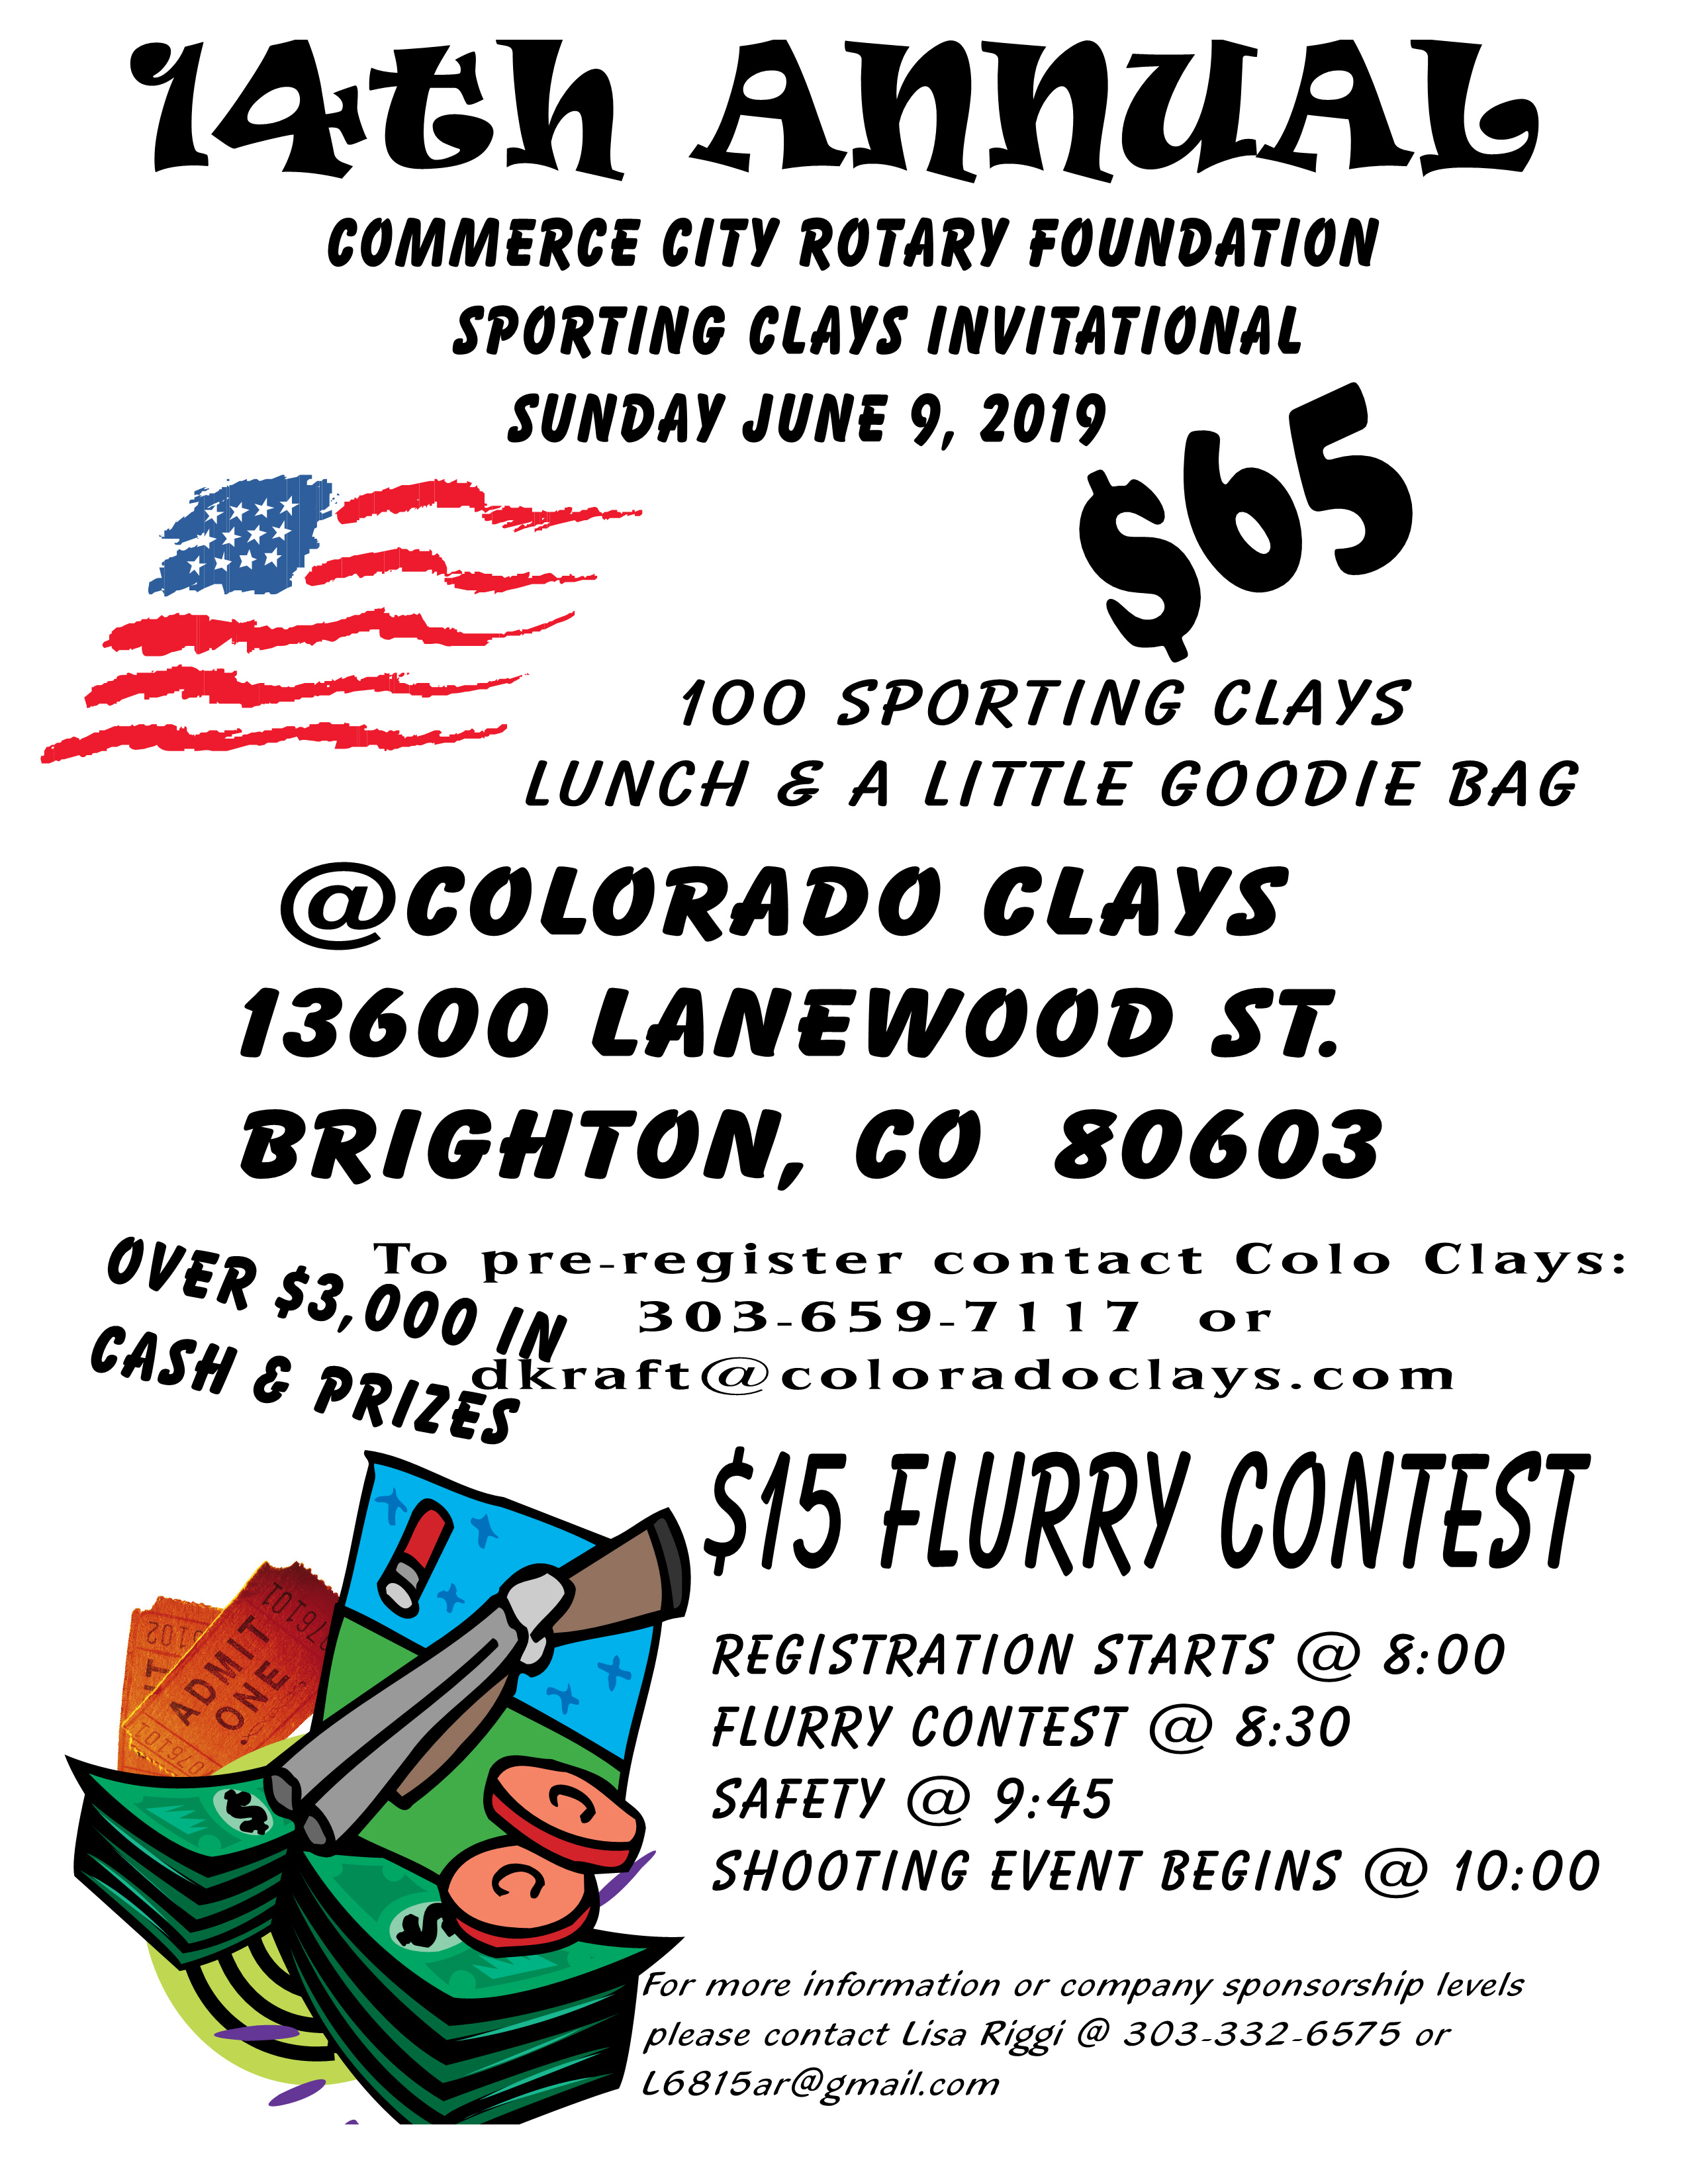 14th Annual Commerce City Rotary Sporting Clays Invitational